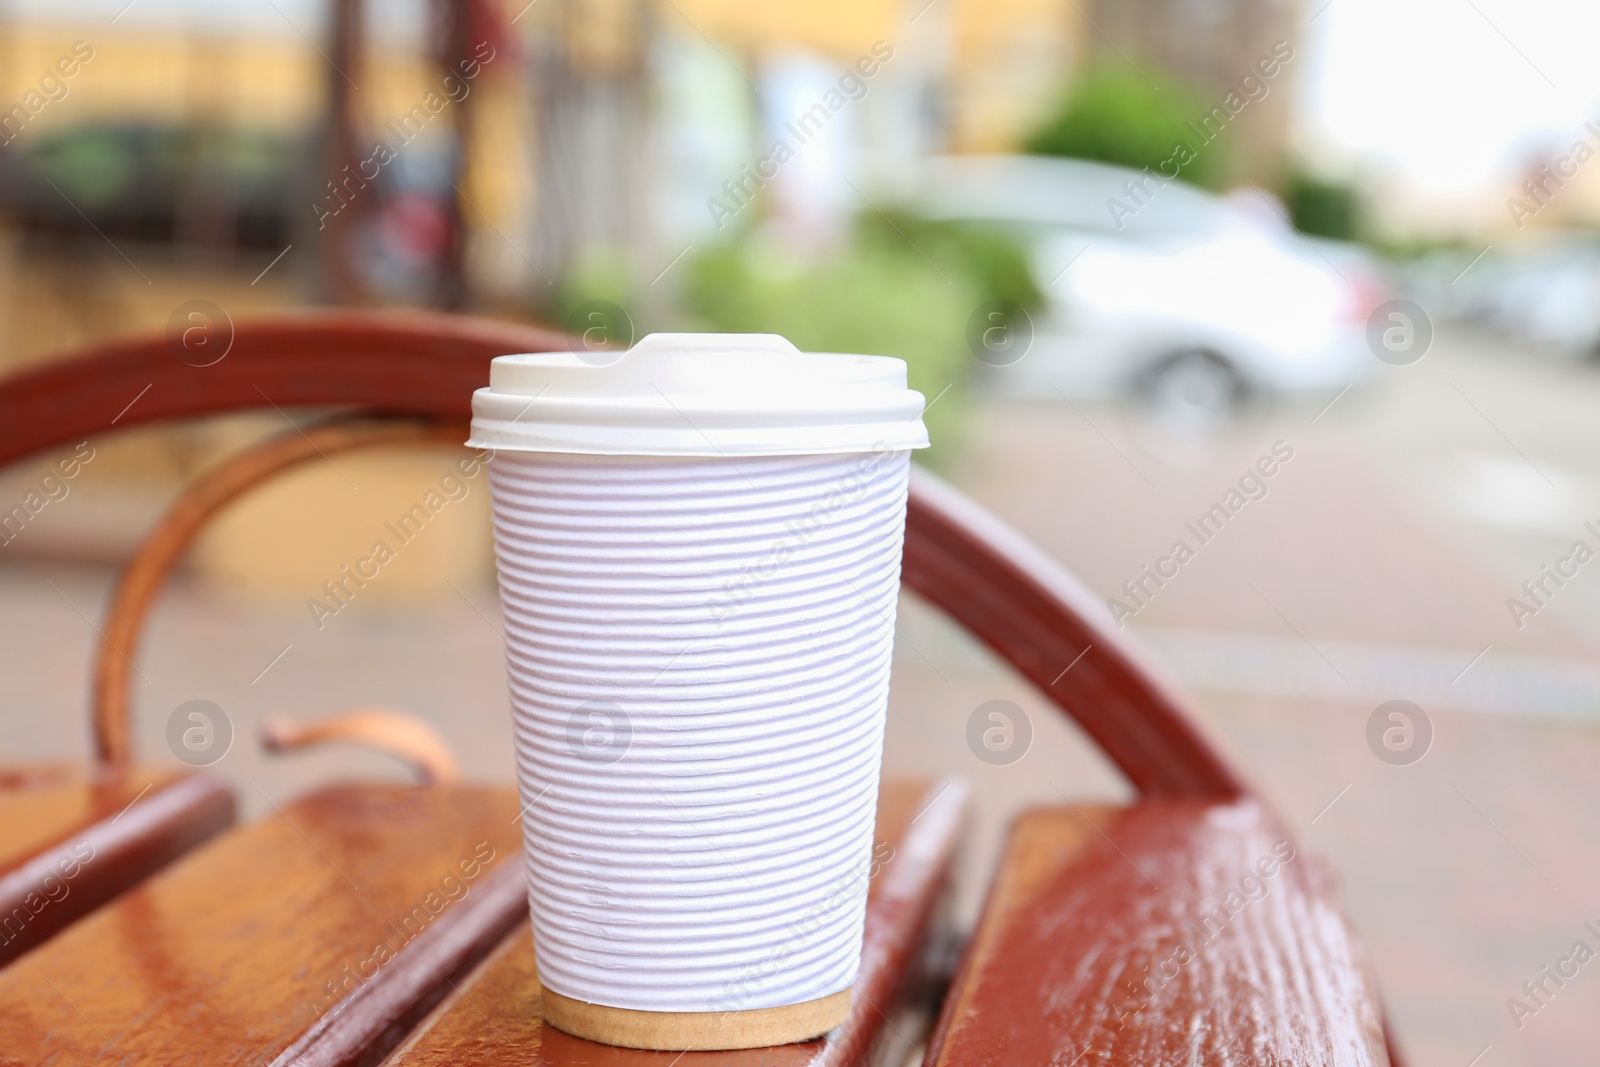 Photo of Paper cup of coffee on wooden bench outdoors. Takeaway drink